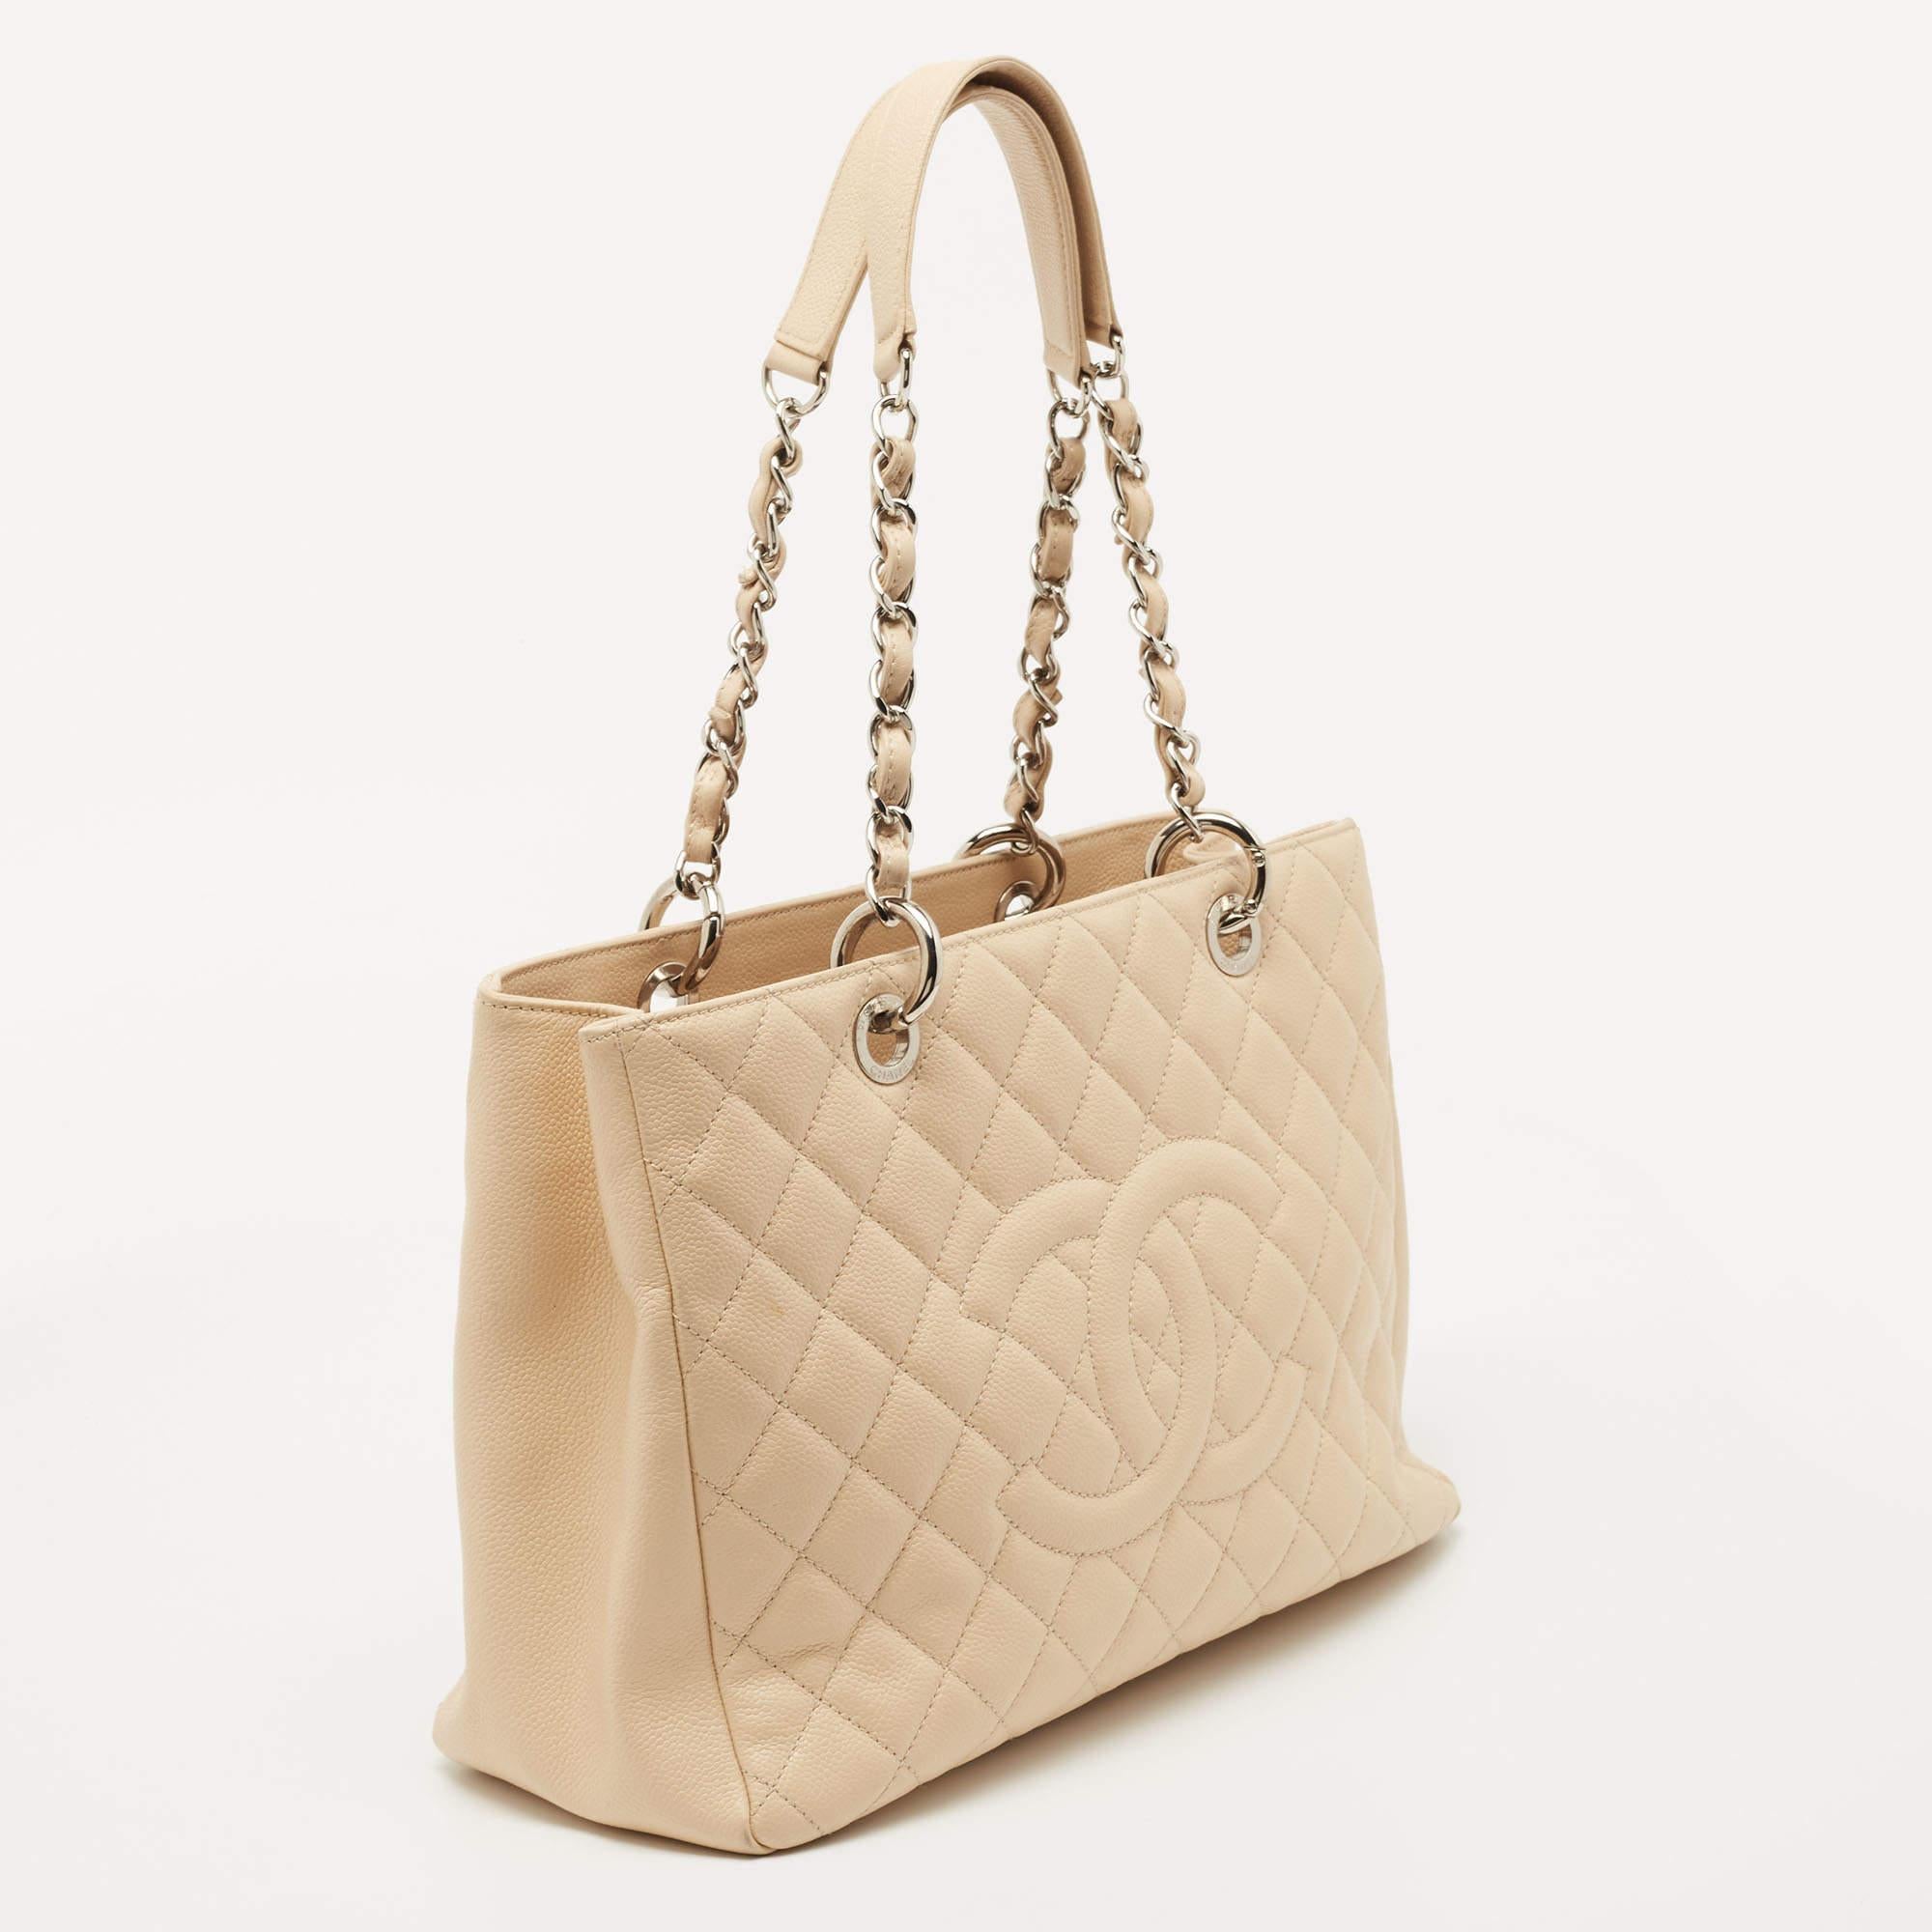 Chanel Beige Quilted Caviar Leather GST Tote 2